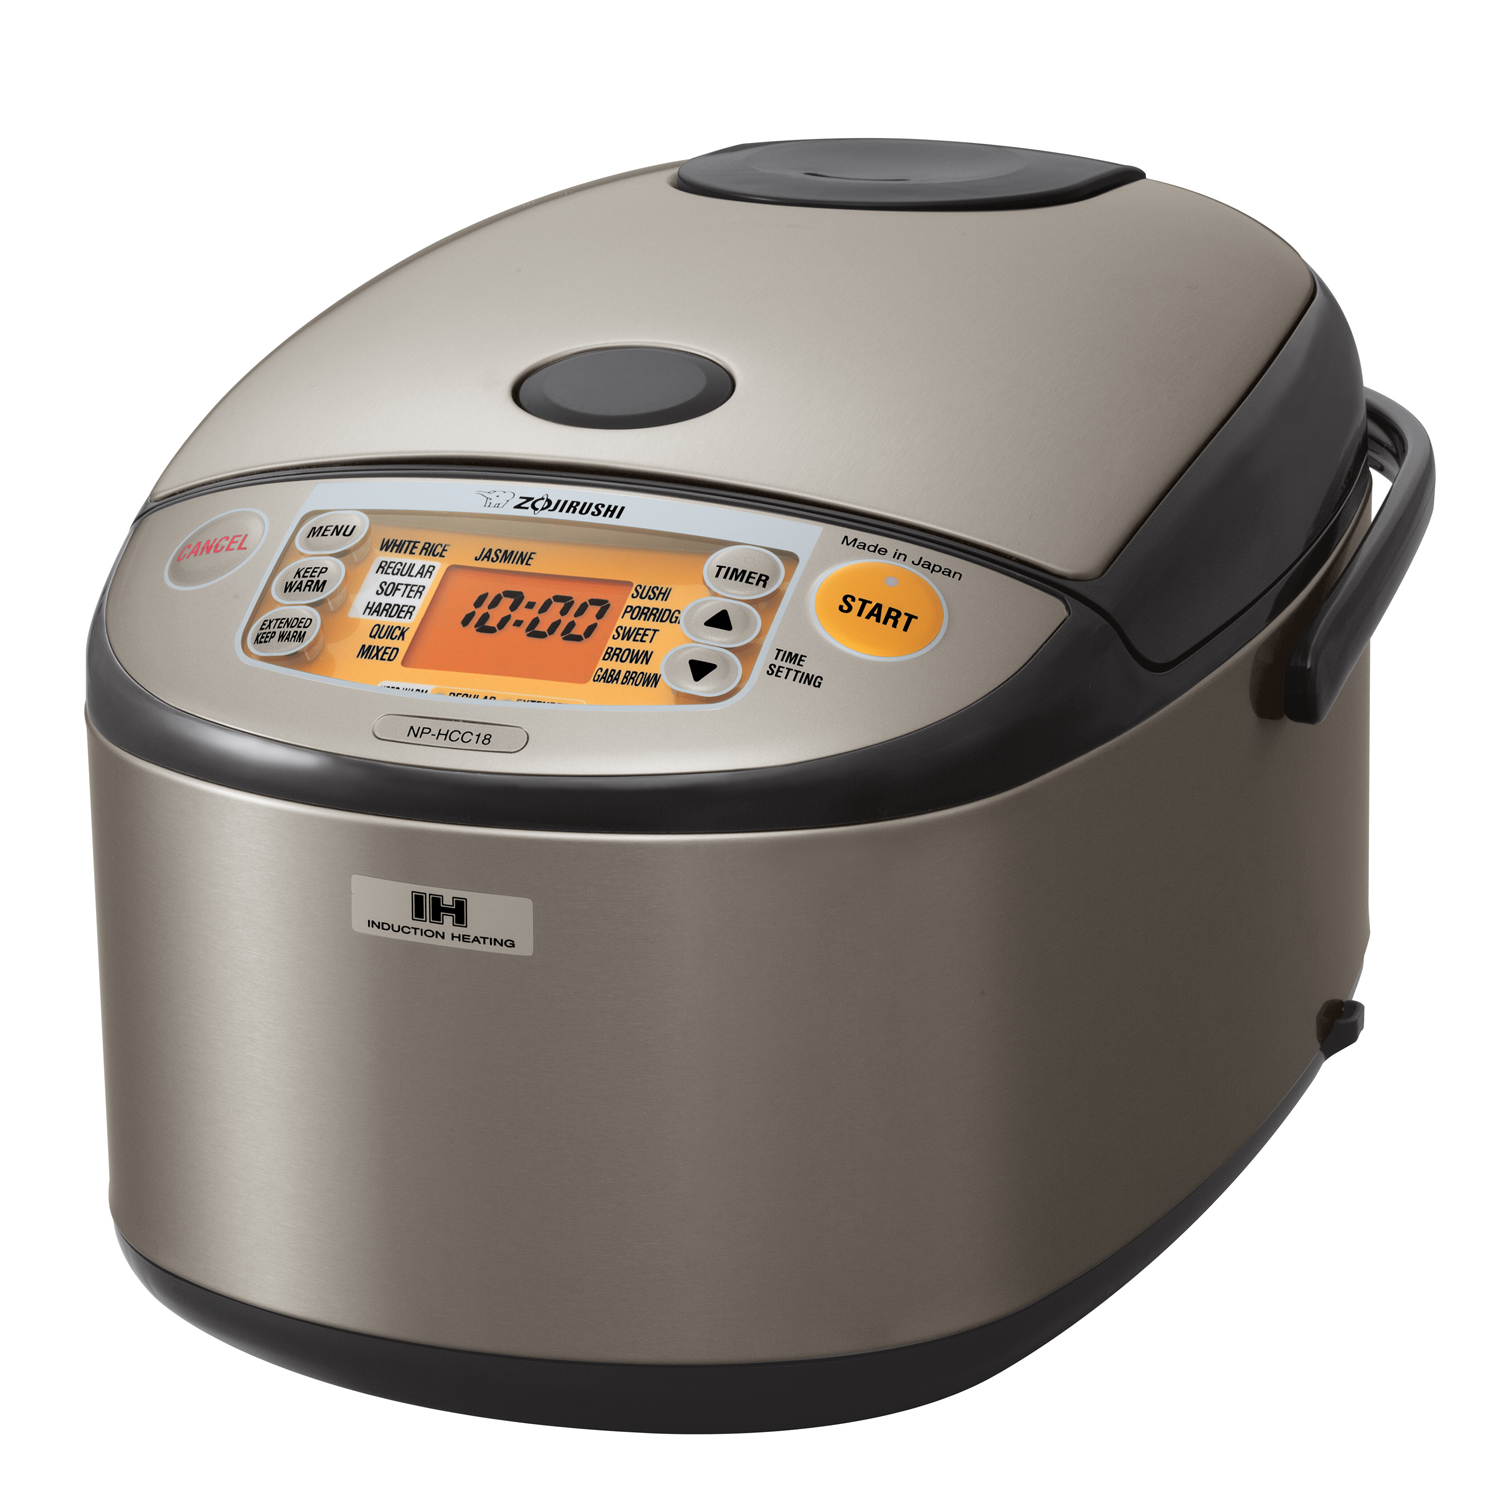 Zojirushi Induction Heating System Rice Cooker & Warmer | Sur La Table